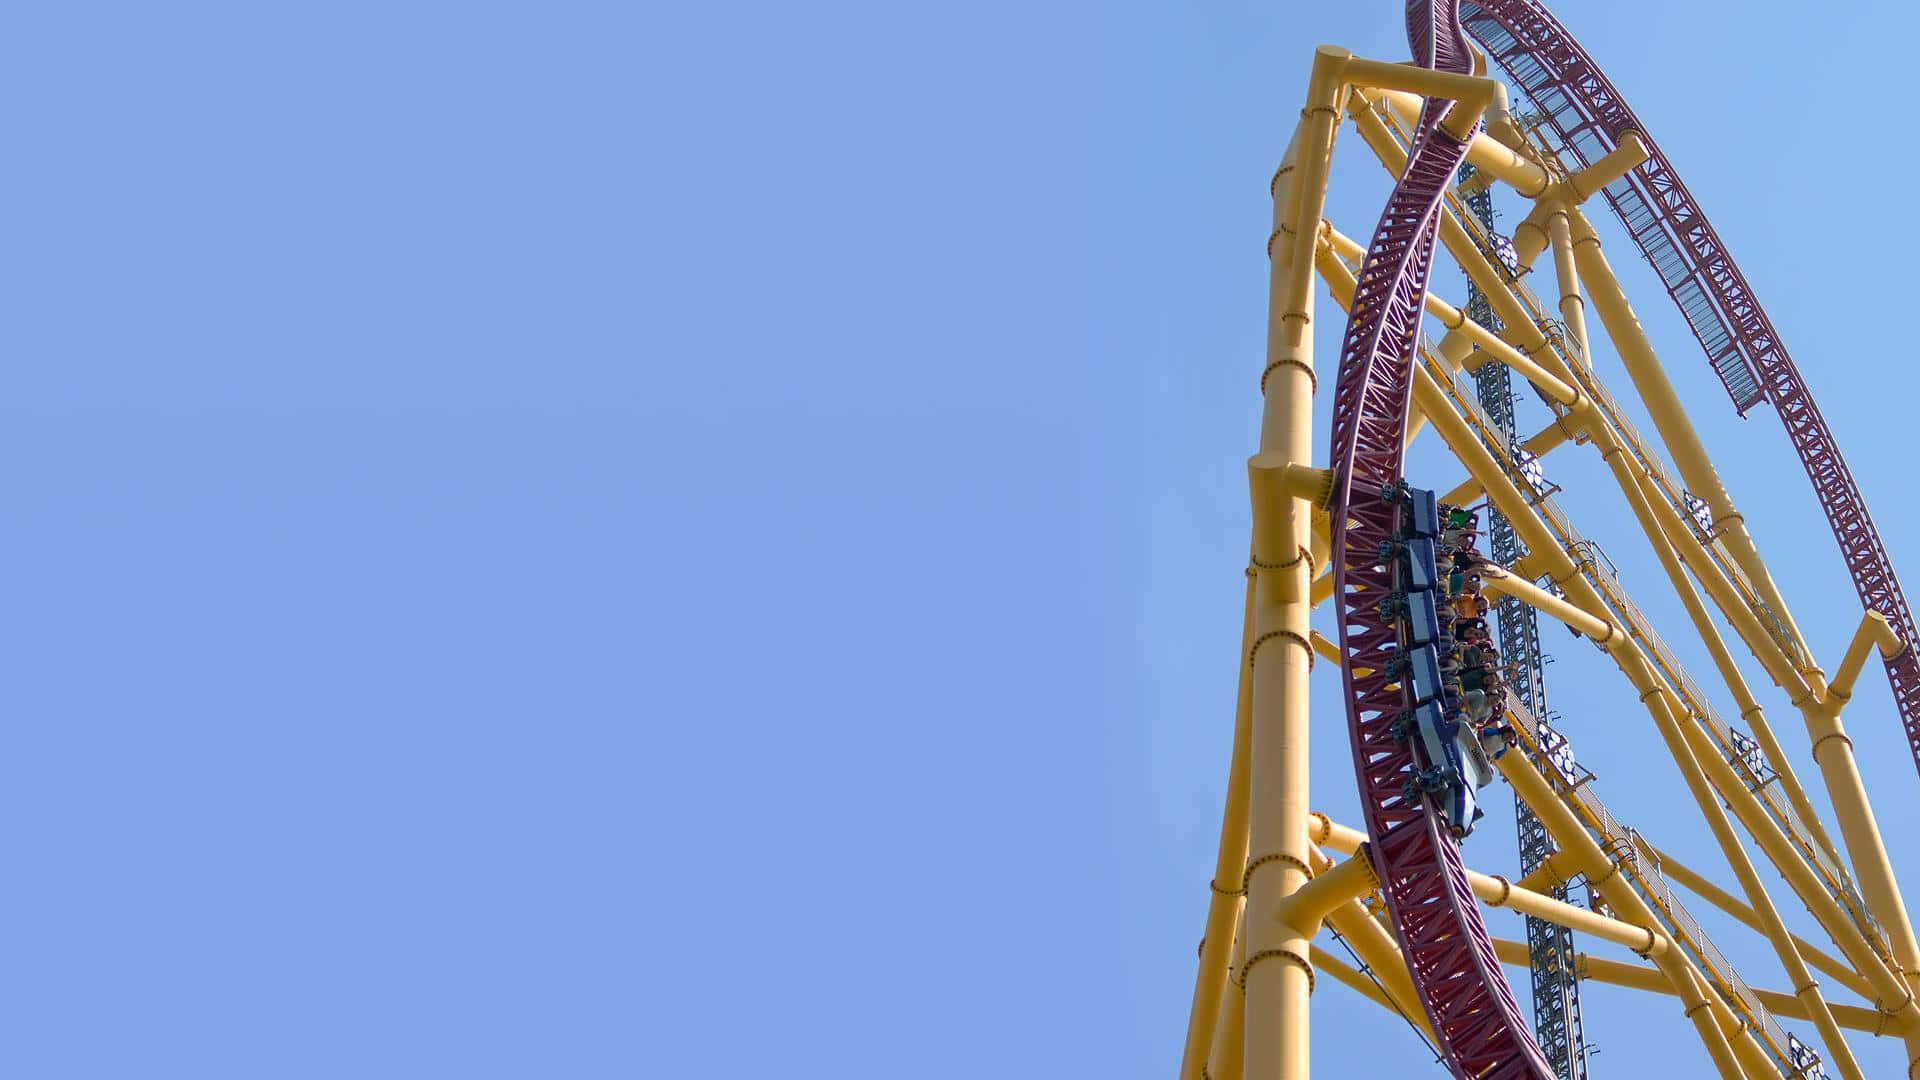 Thrilling Roller Coaster Ride in an Amusement Park